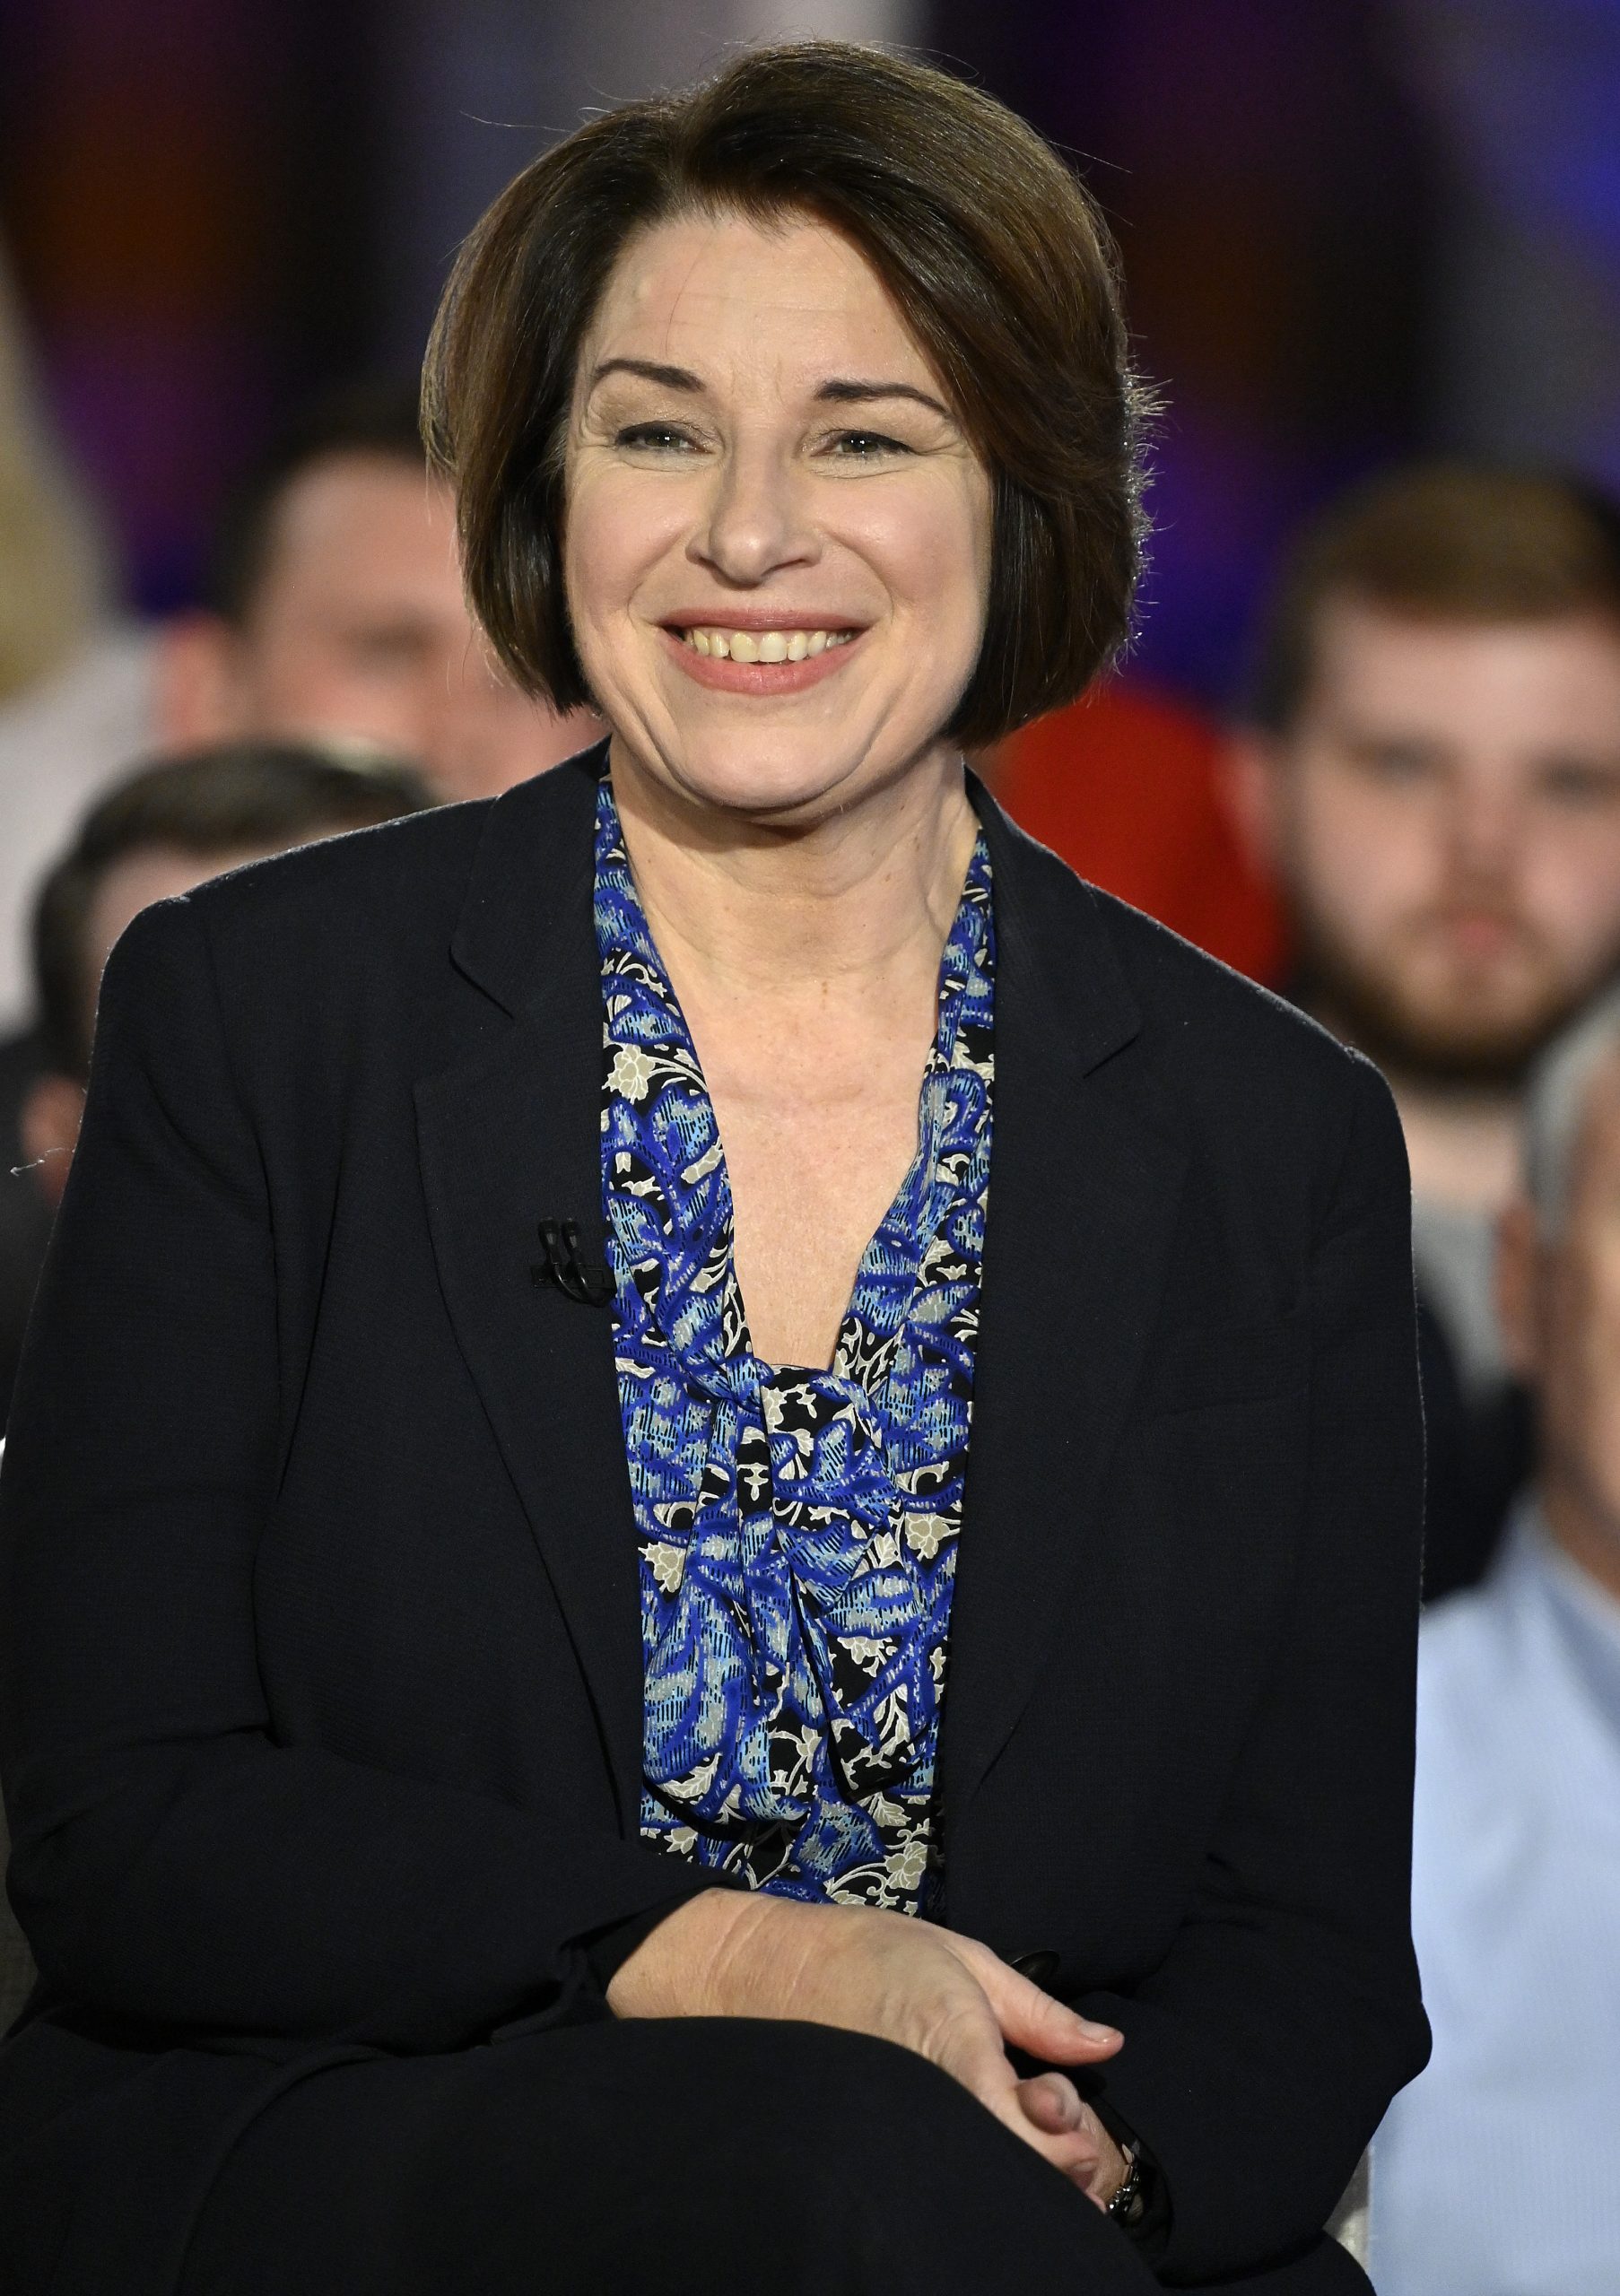 Sen. Amy Klobuchar participates in a Fox News Channel town hall on Feb. 27, 2020, in Raleigh, North Carolina. (Photo by Grant Halverson/Getty Images)